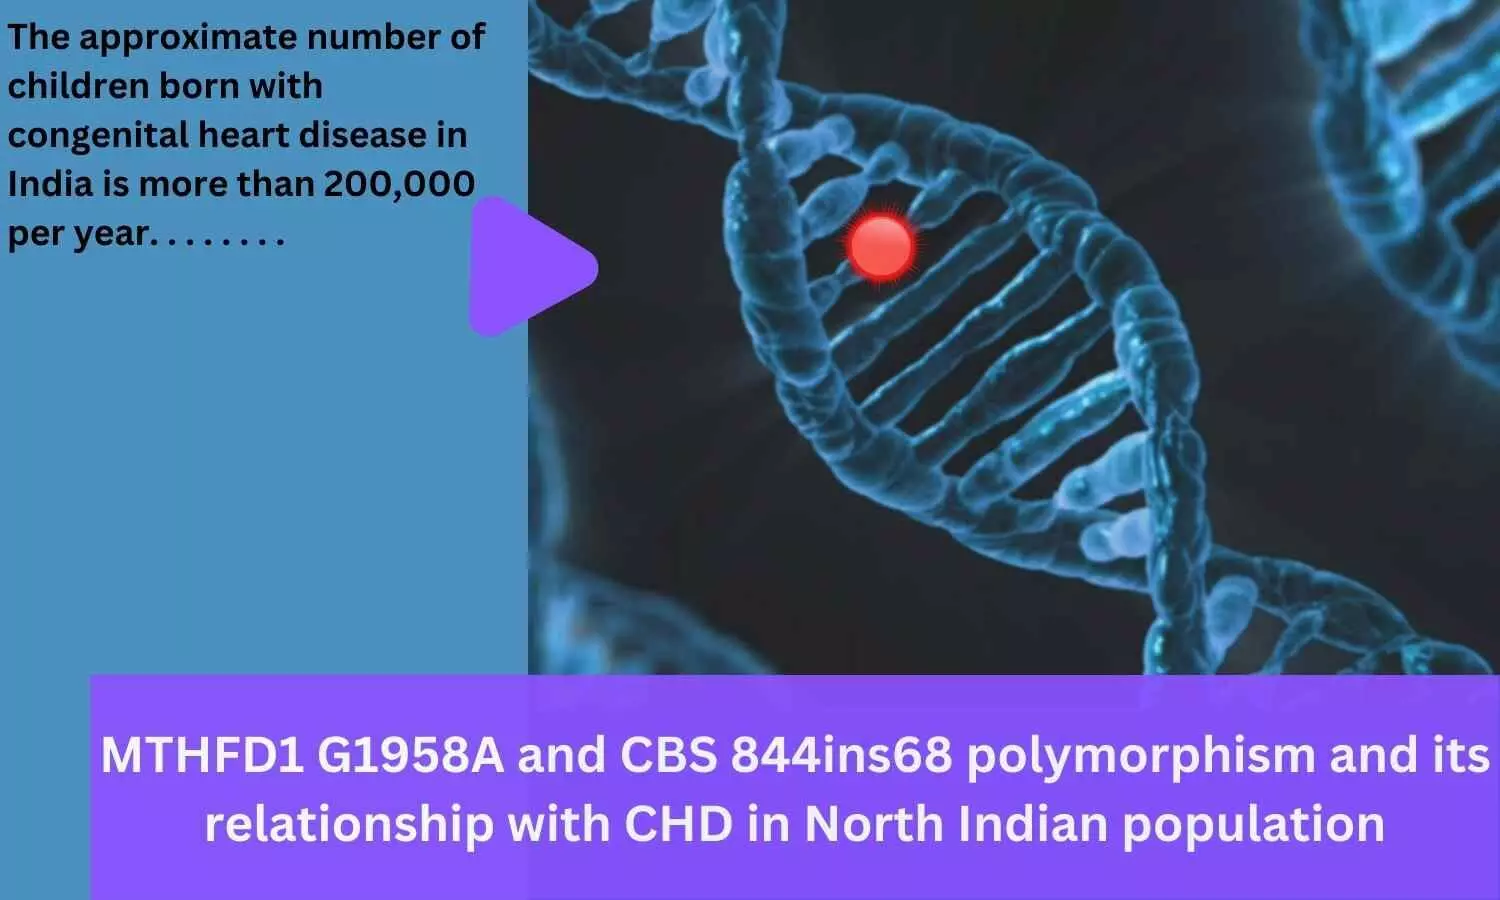 MTHFD1 G1958A and CBS 844ins68 polymorphism and its relationship with CHD in North Indian population